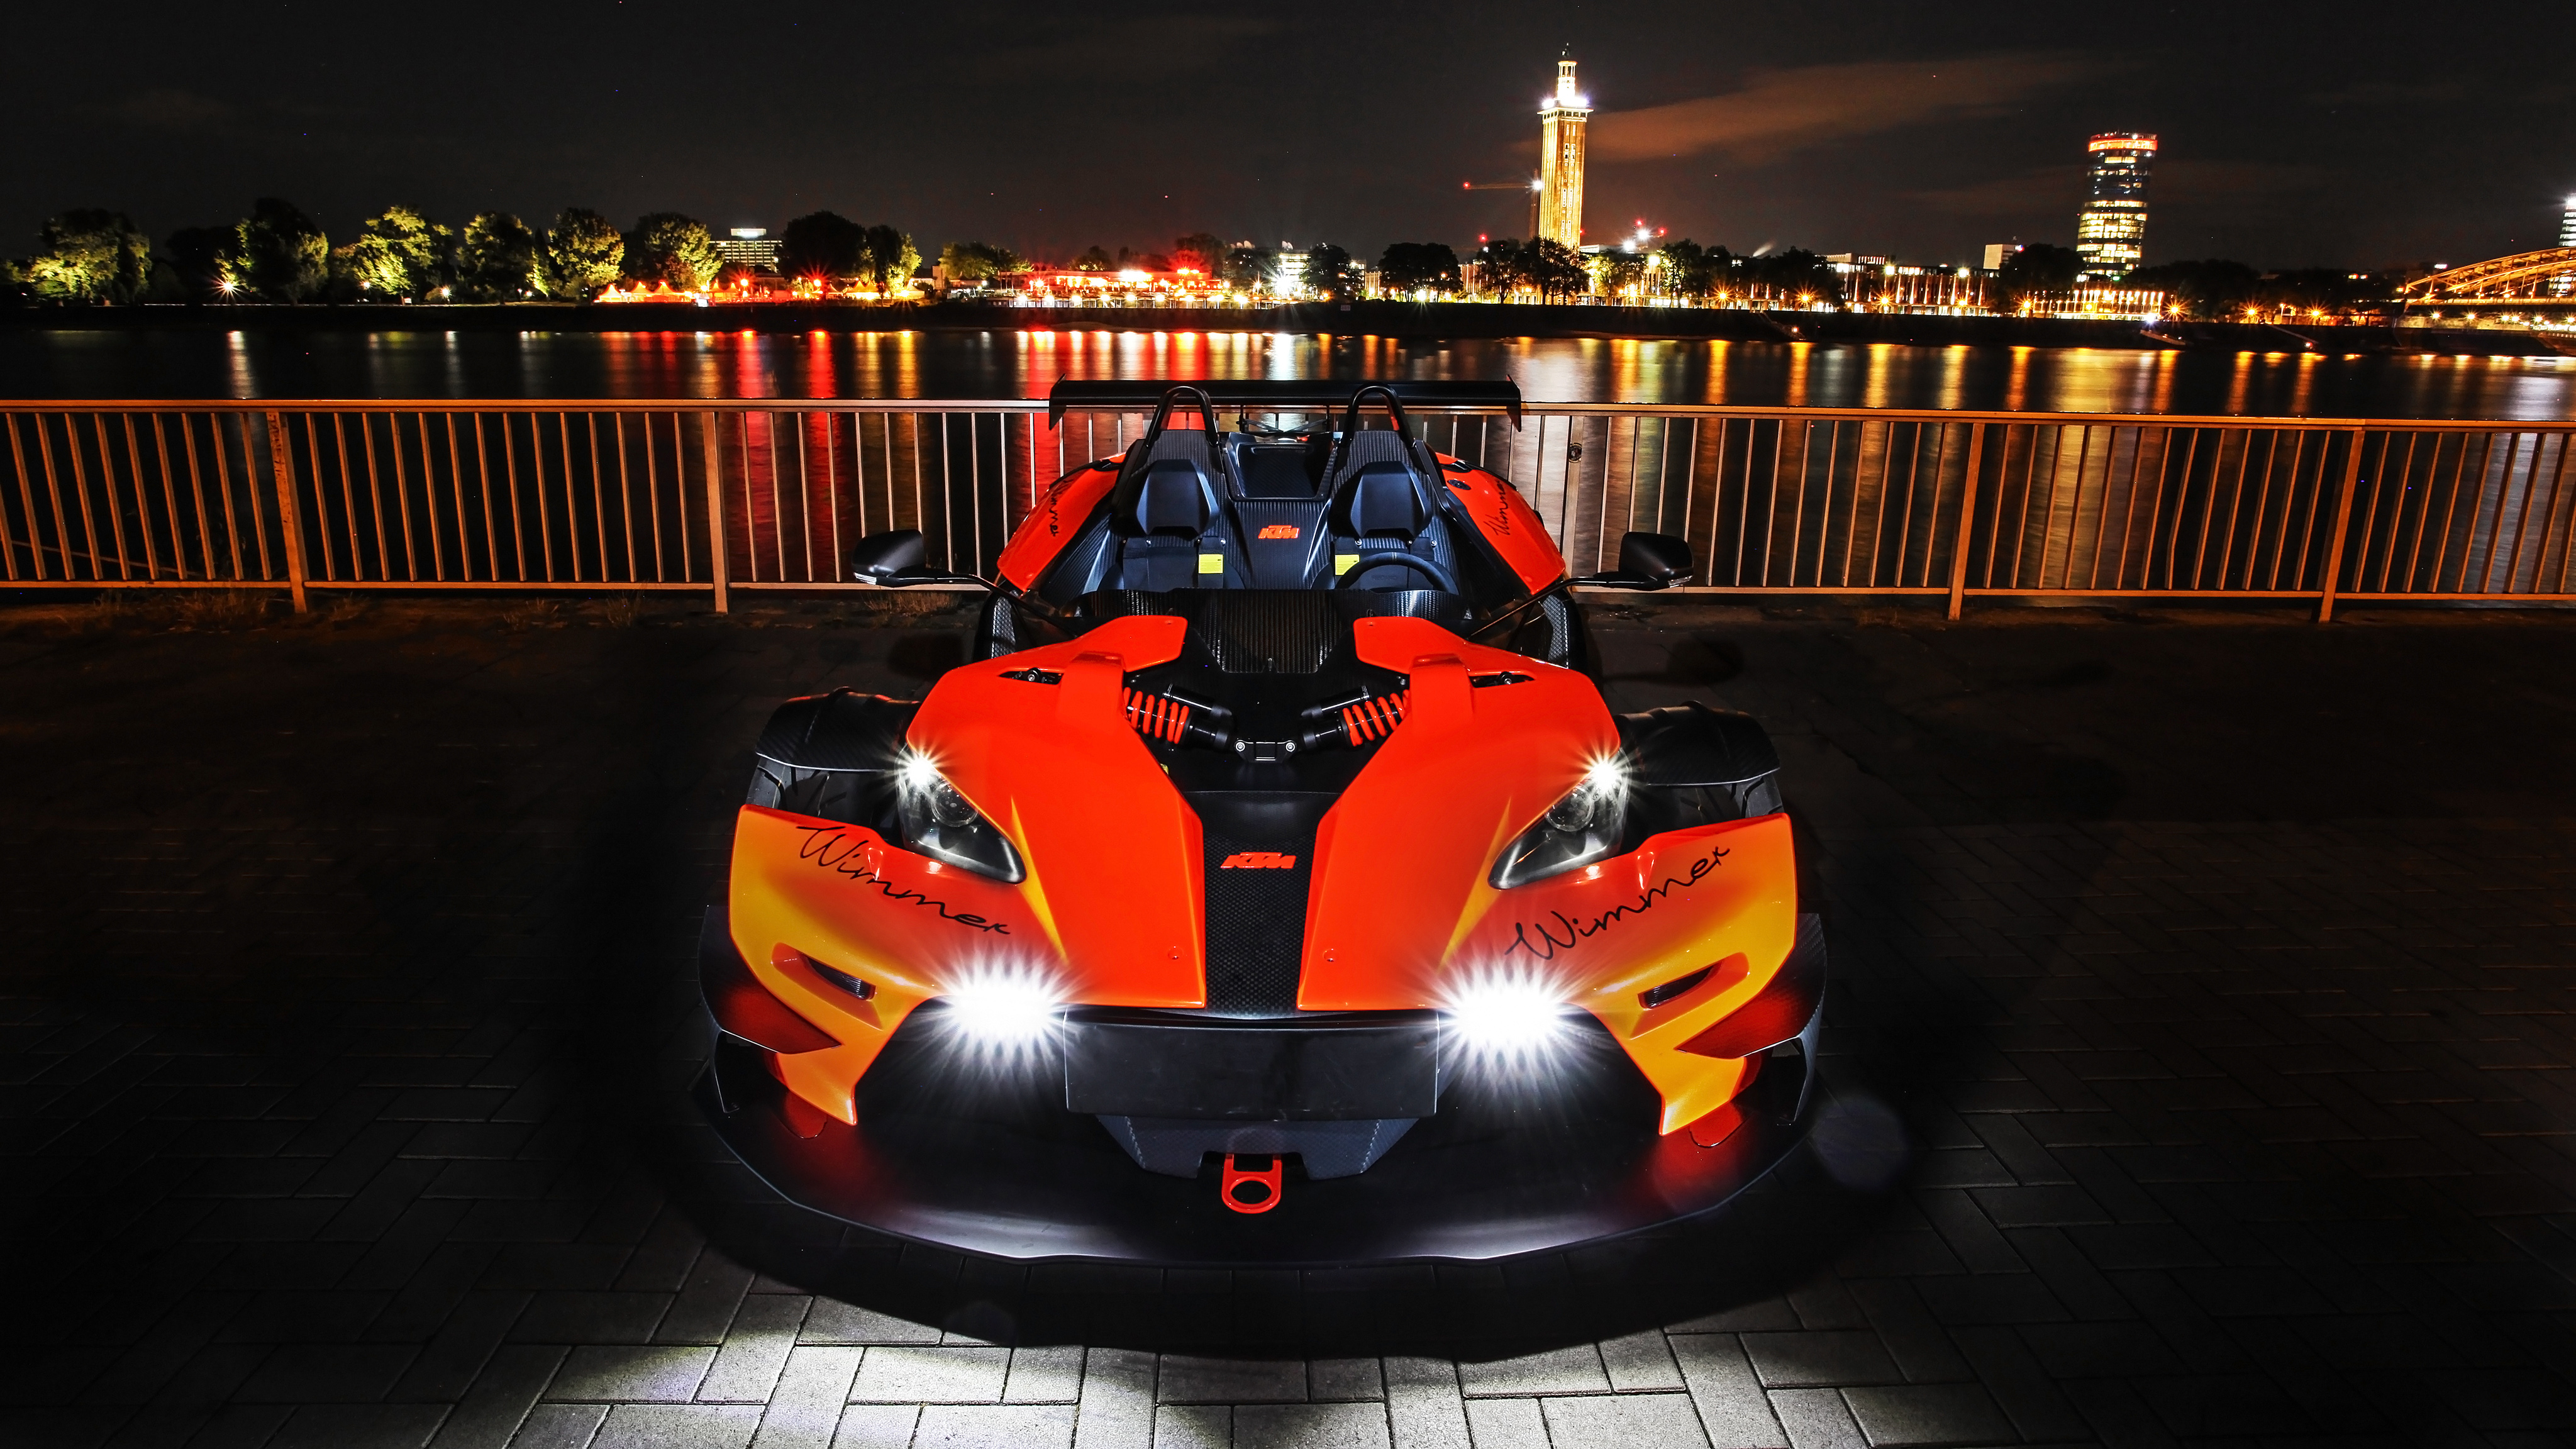 Wimmer RS KTM X-Bow R 2019 4K Wallpaper